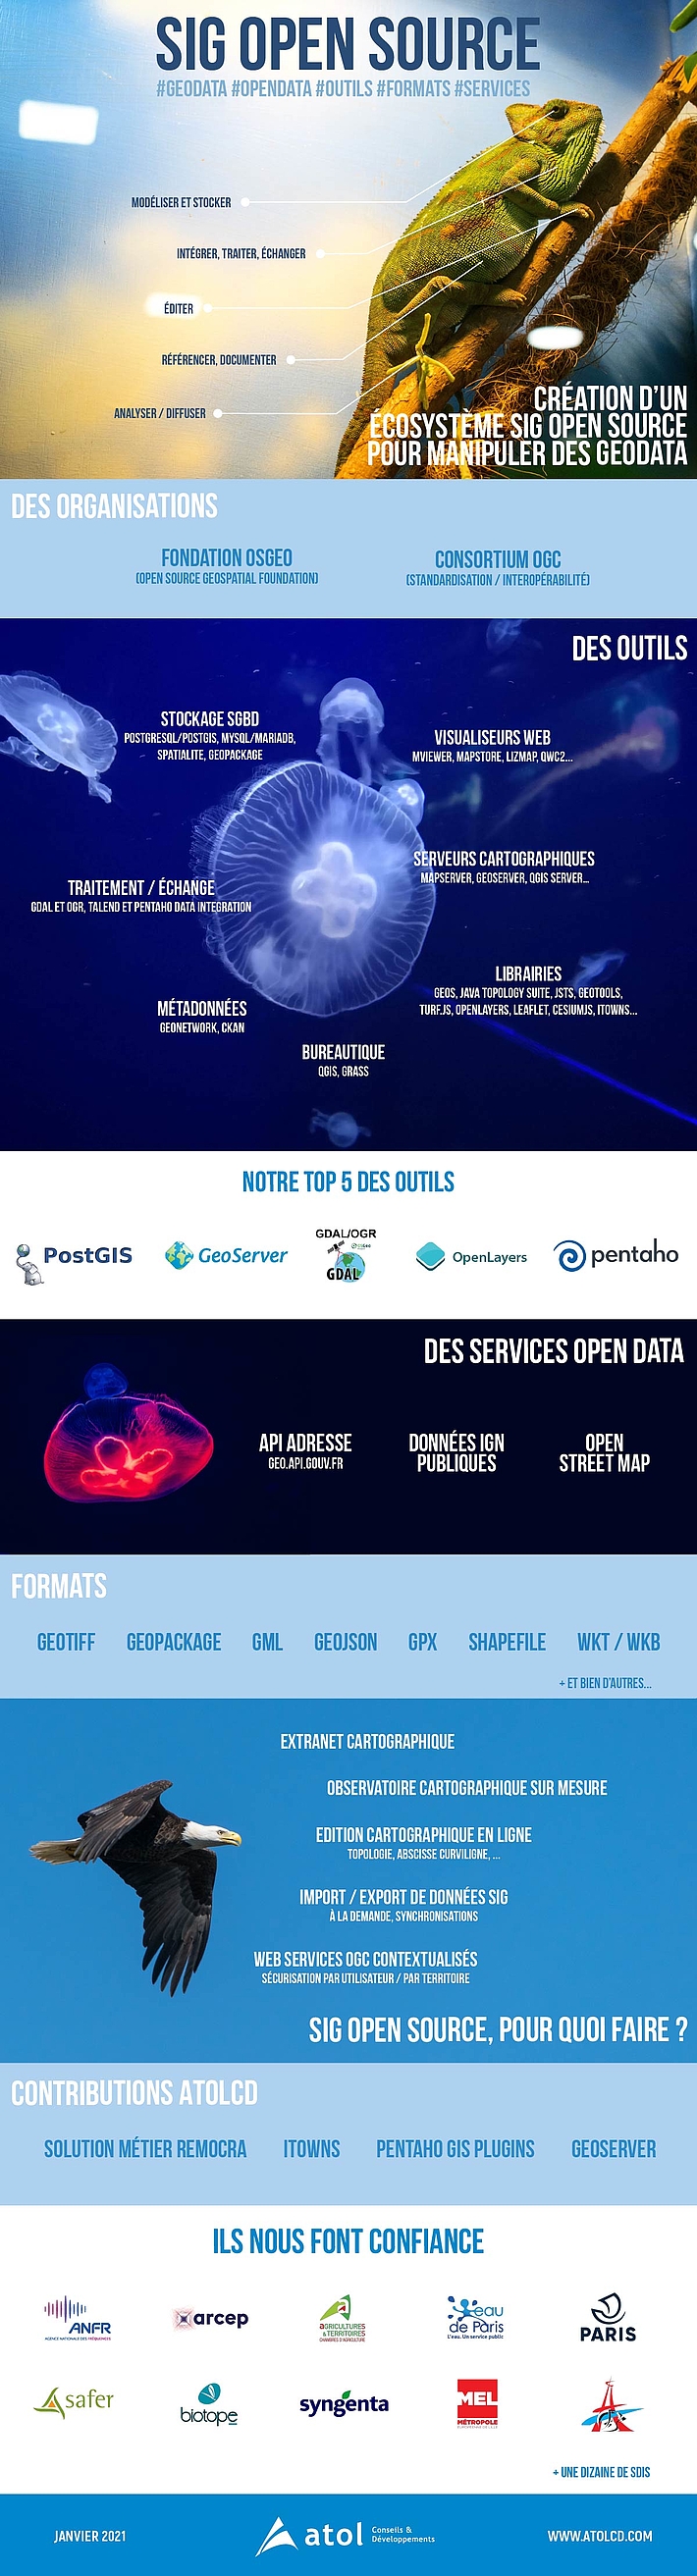 Infographie SIG open source